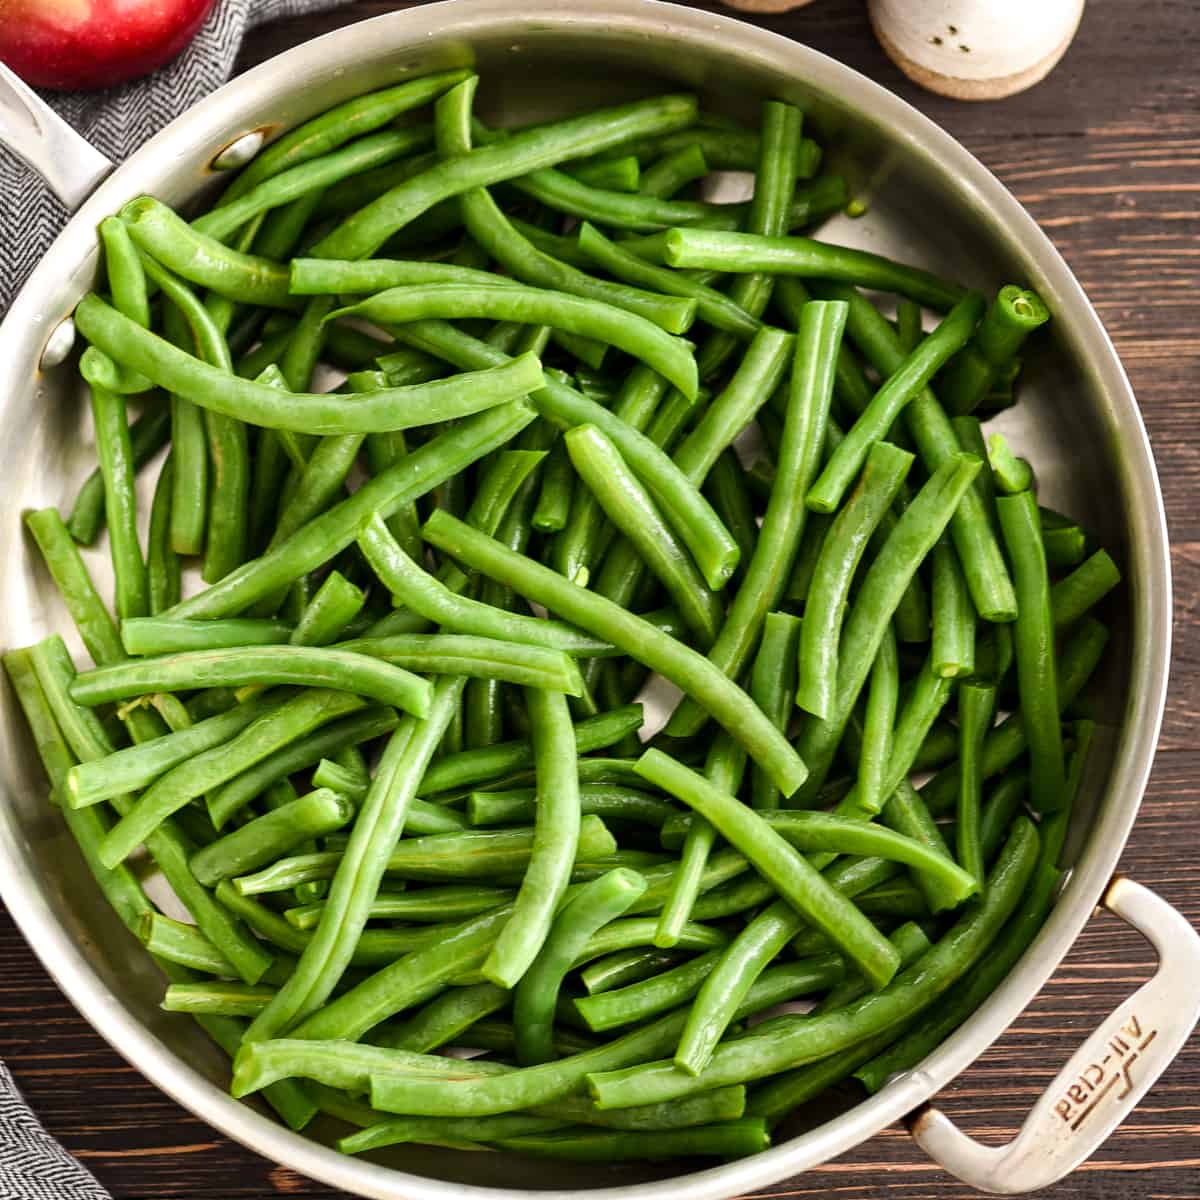 Overhead view of Sautéed Green Beans Recipe in a frying pan before cooking